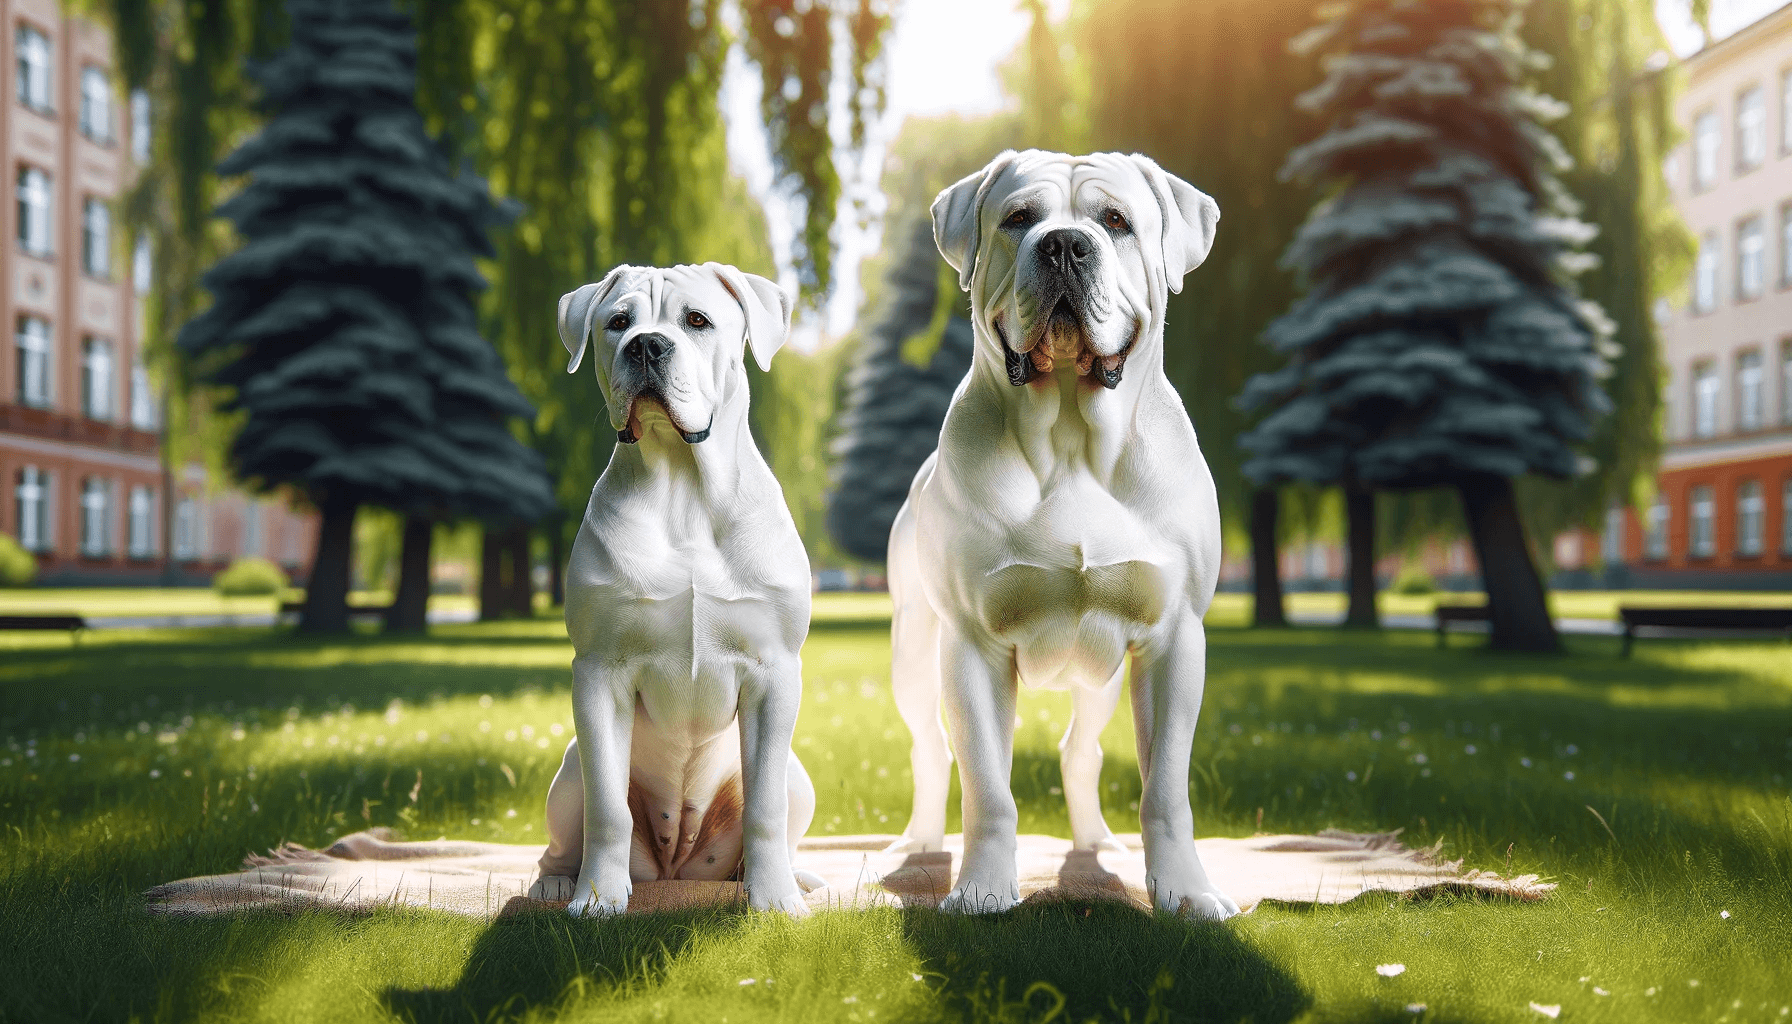 An illustration depicting the differences between male and female White Cane Corsos.